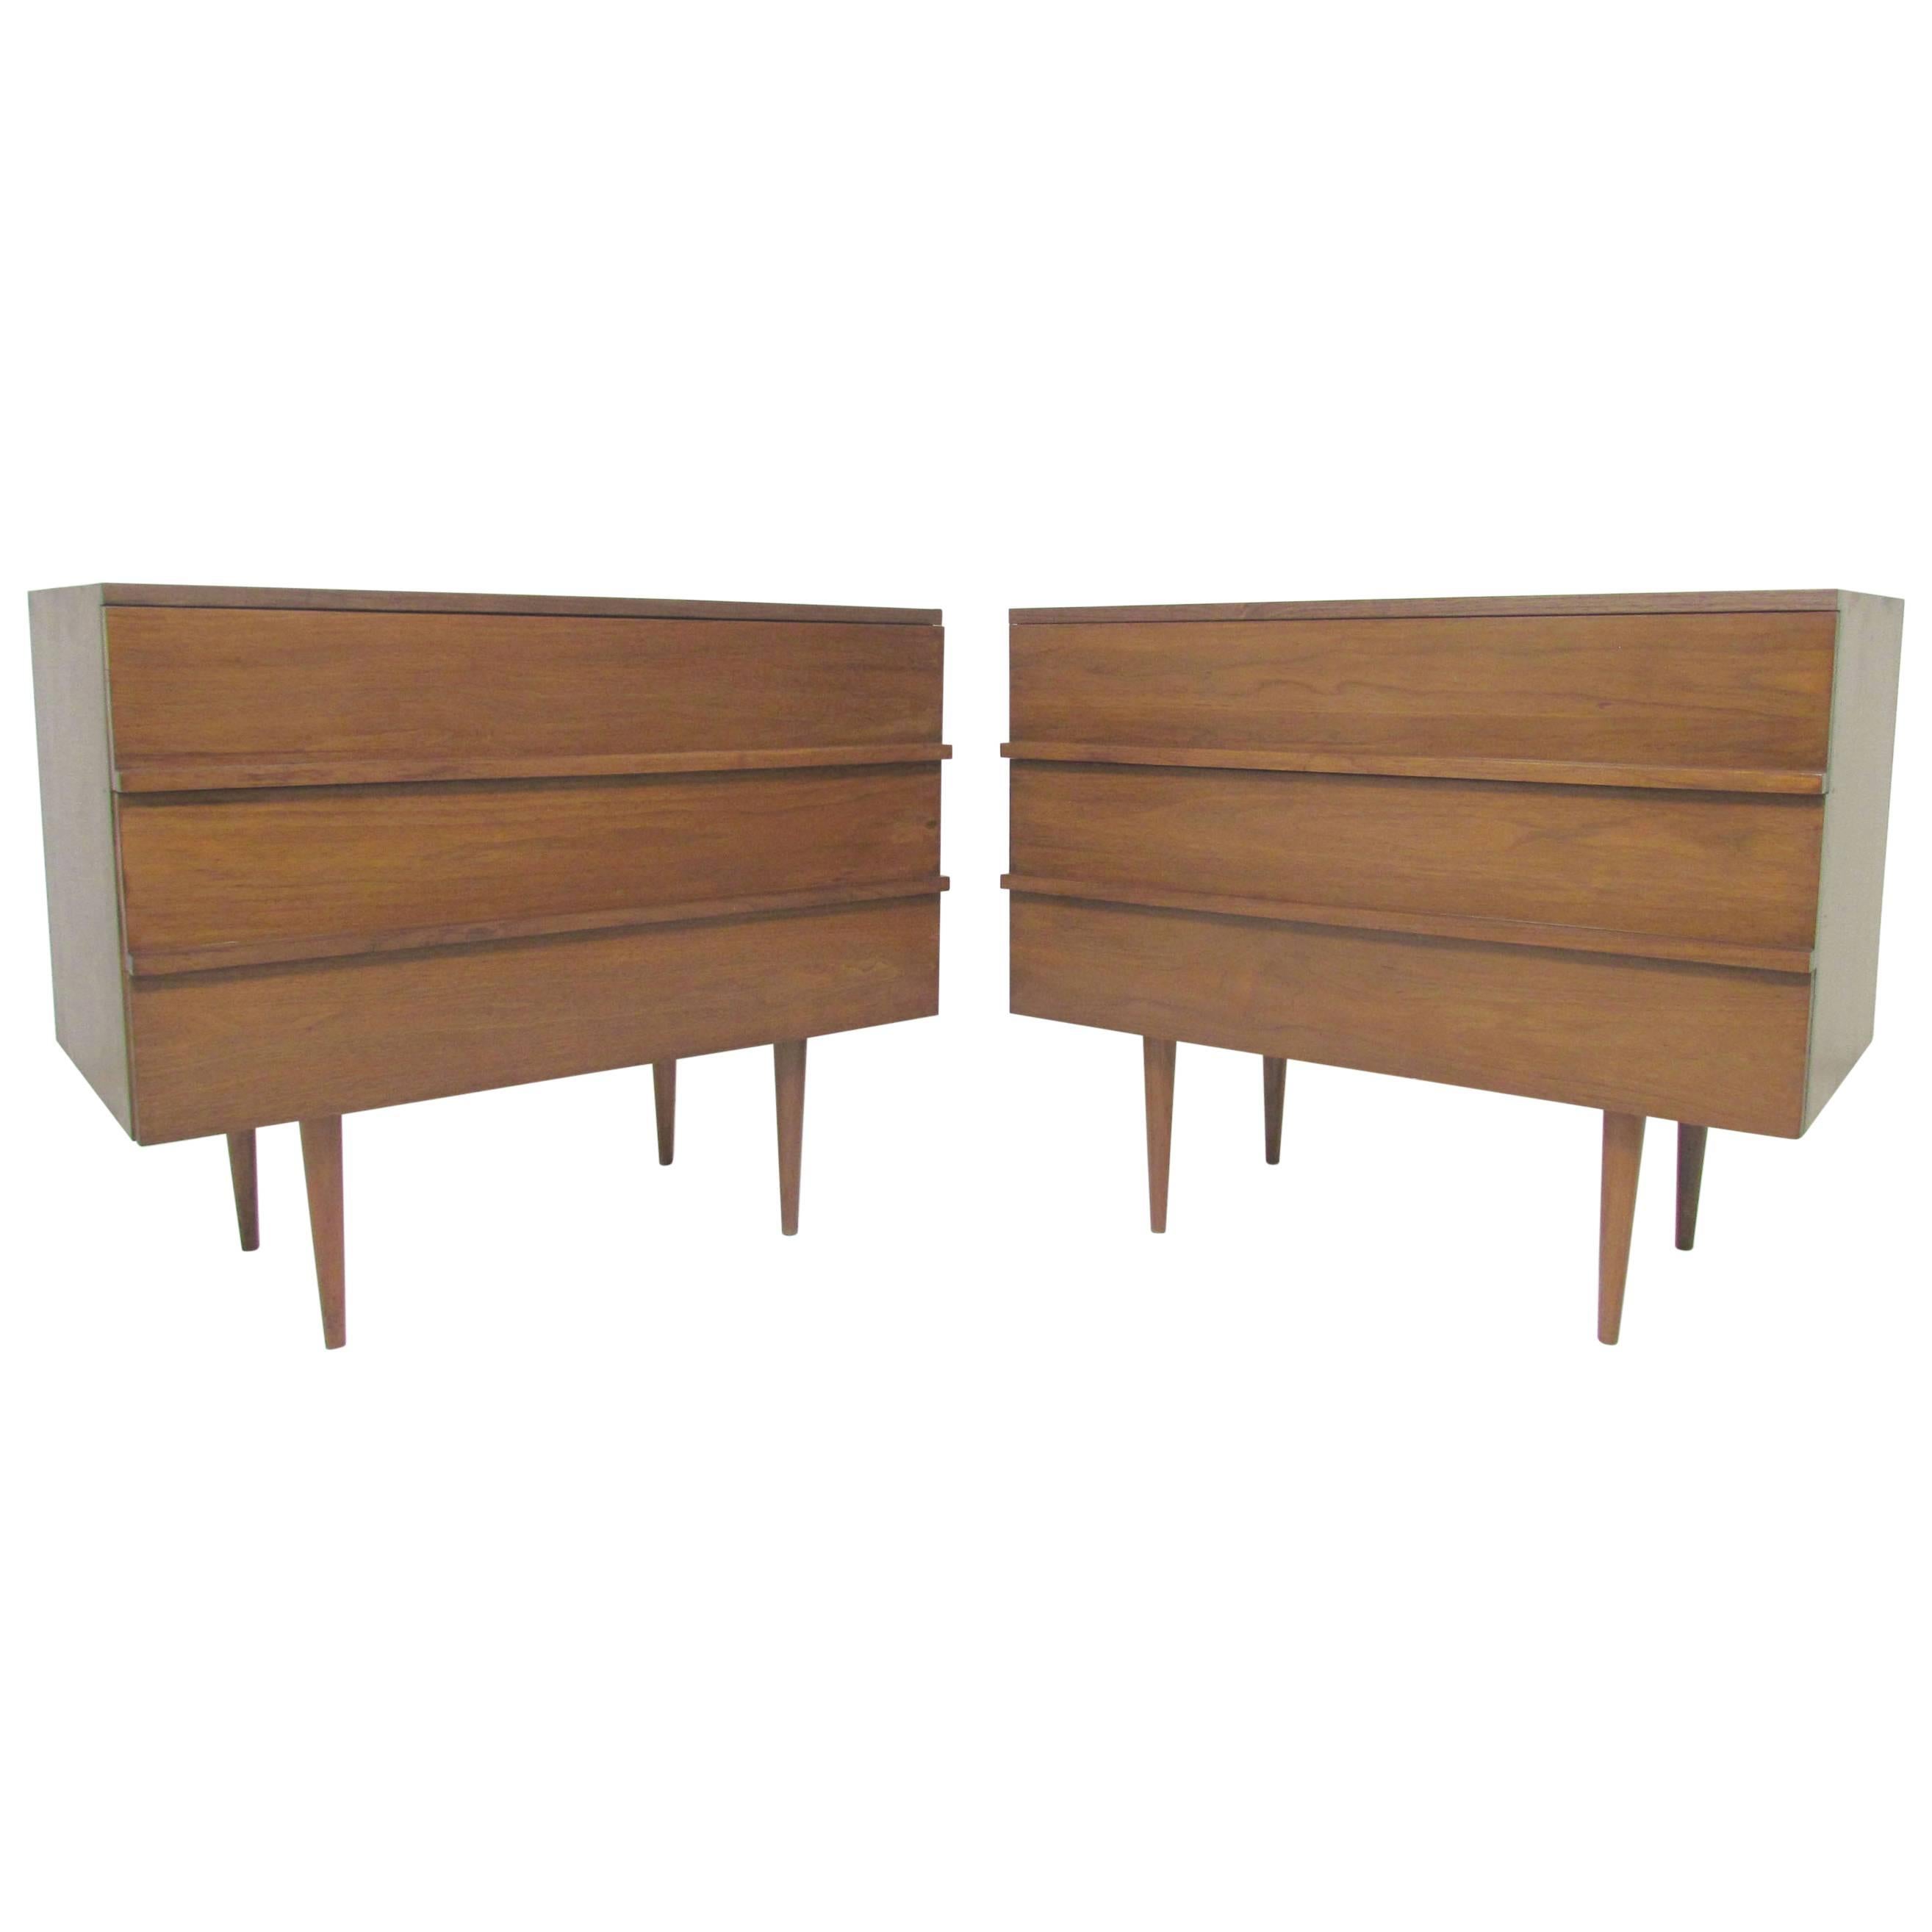 Pair of Mid-Century American Bedside Chests in Walnut, circa 1960s